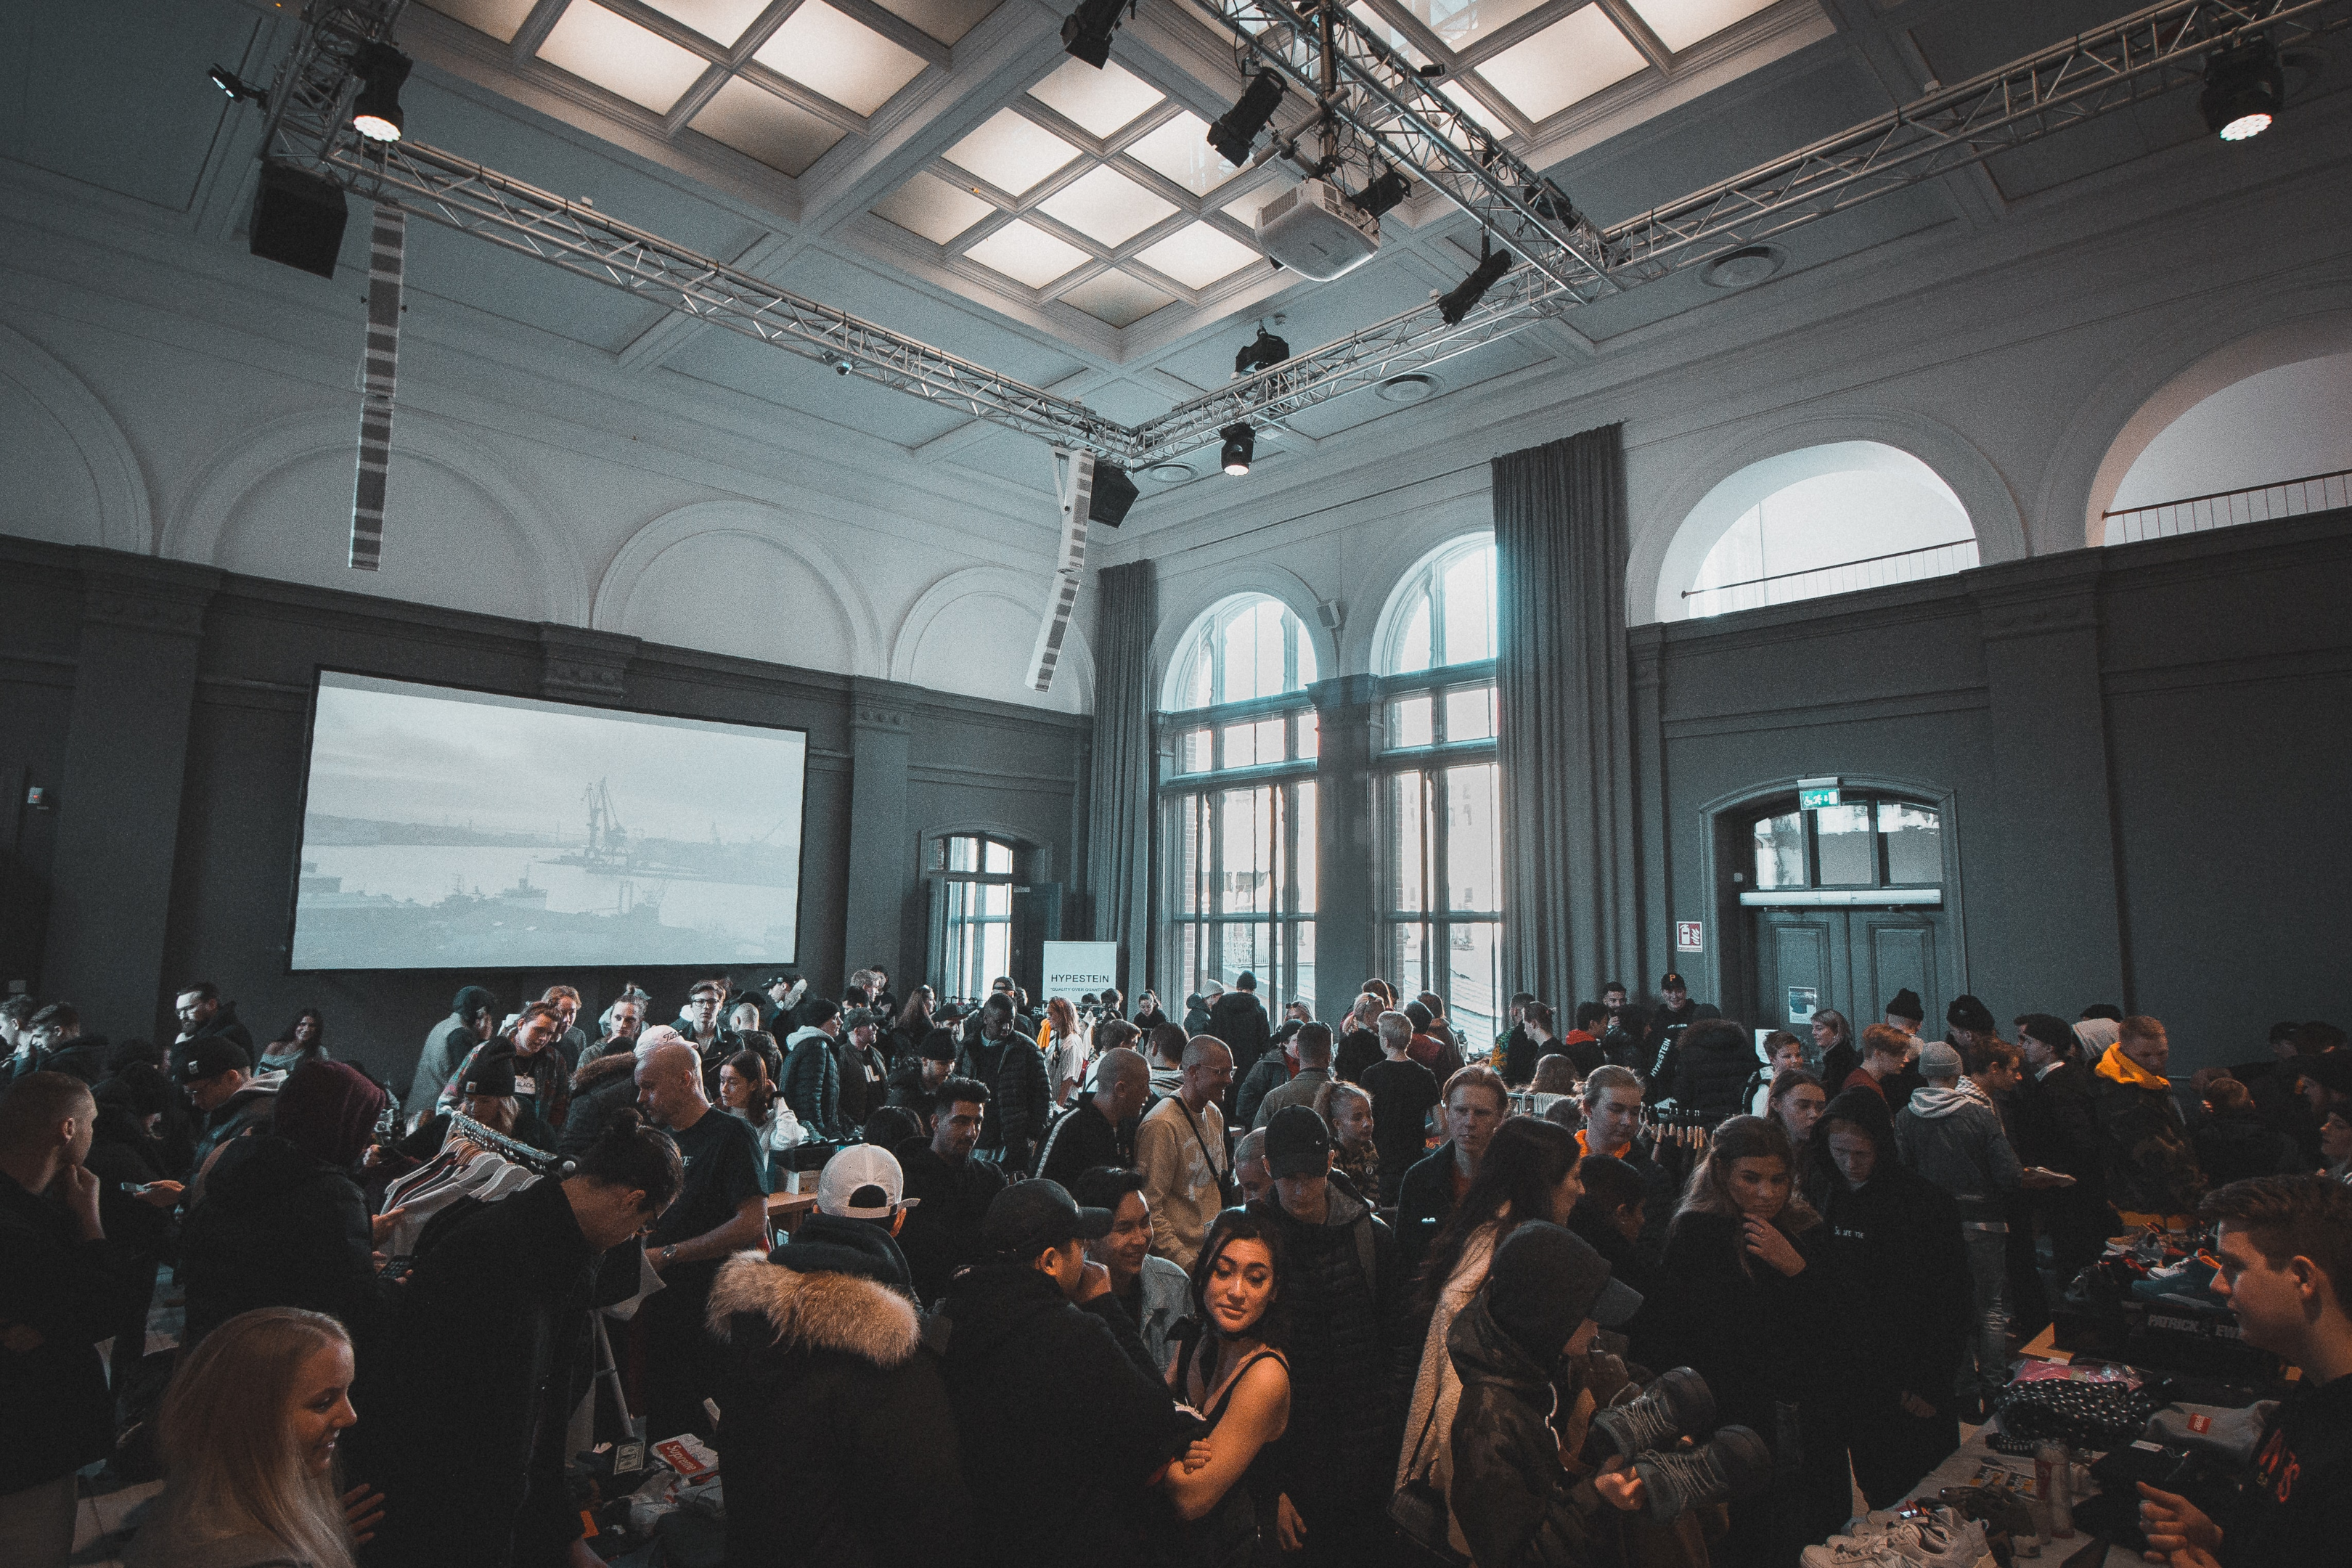 Face to Face Events Back on Track | photo of a small crowd gathered in an enclosed lounge. | Link: https://images.unsplash.com/photo-1531058020387-3be344556be6?ixlib=rb-1.2.1&ixid=MnwxMjA3fDB8MHxwaG90by1wYWdlfHx8fGVufDB8fHx8&auto=format&fit=crop&w=870&q=80